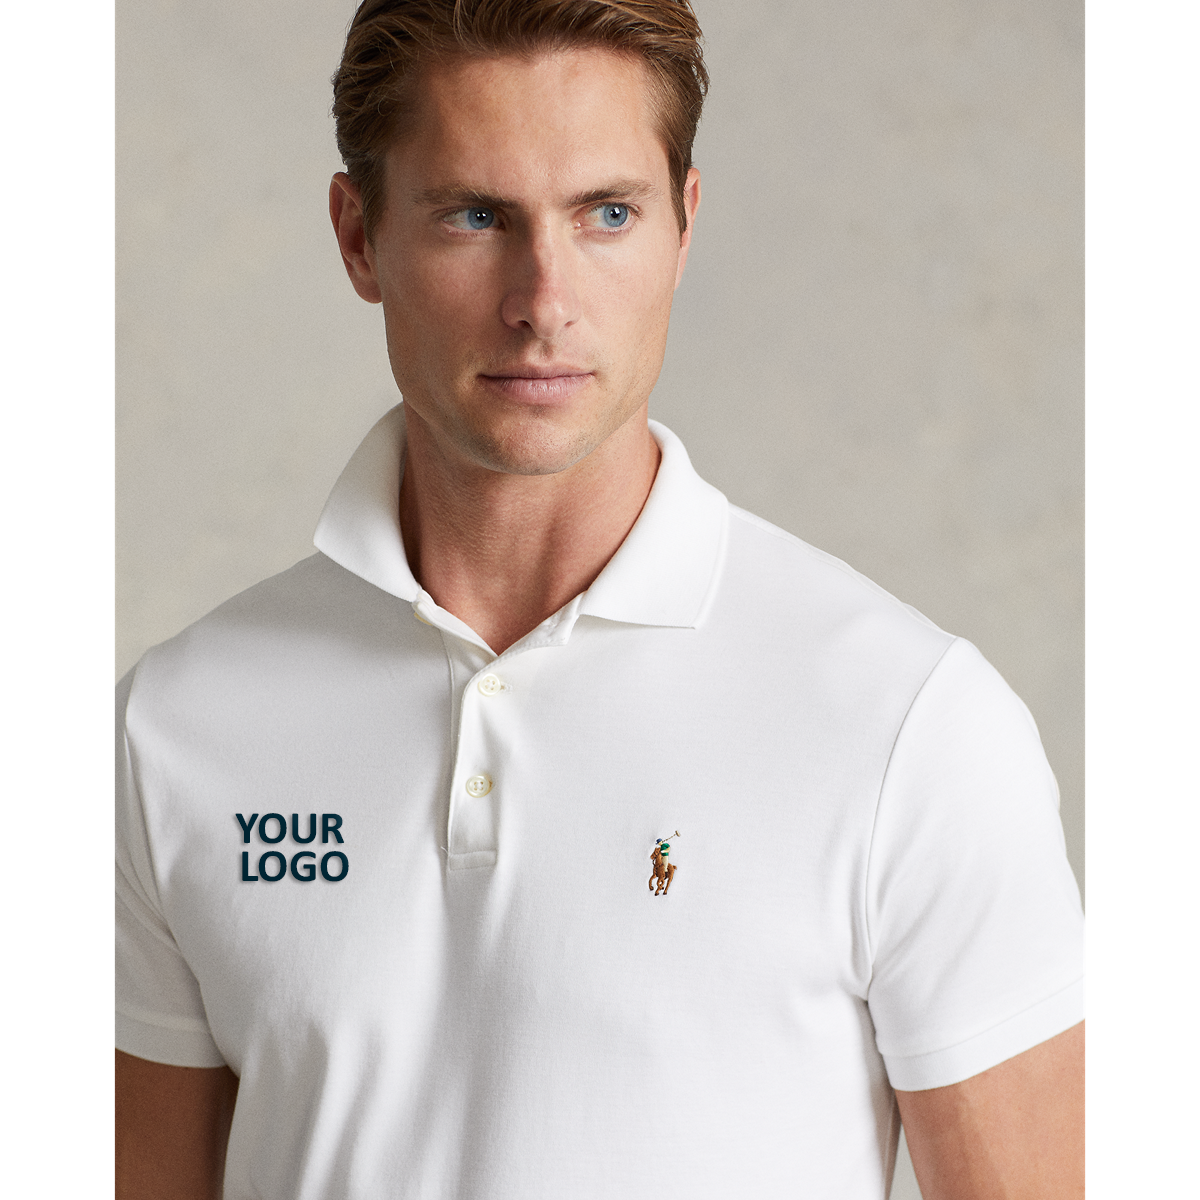 Ralph Lauren Soft Touch Polo - Classic Fit KSC53A White